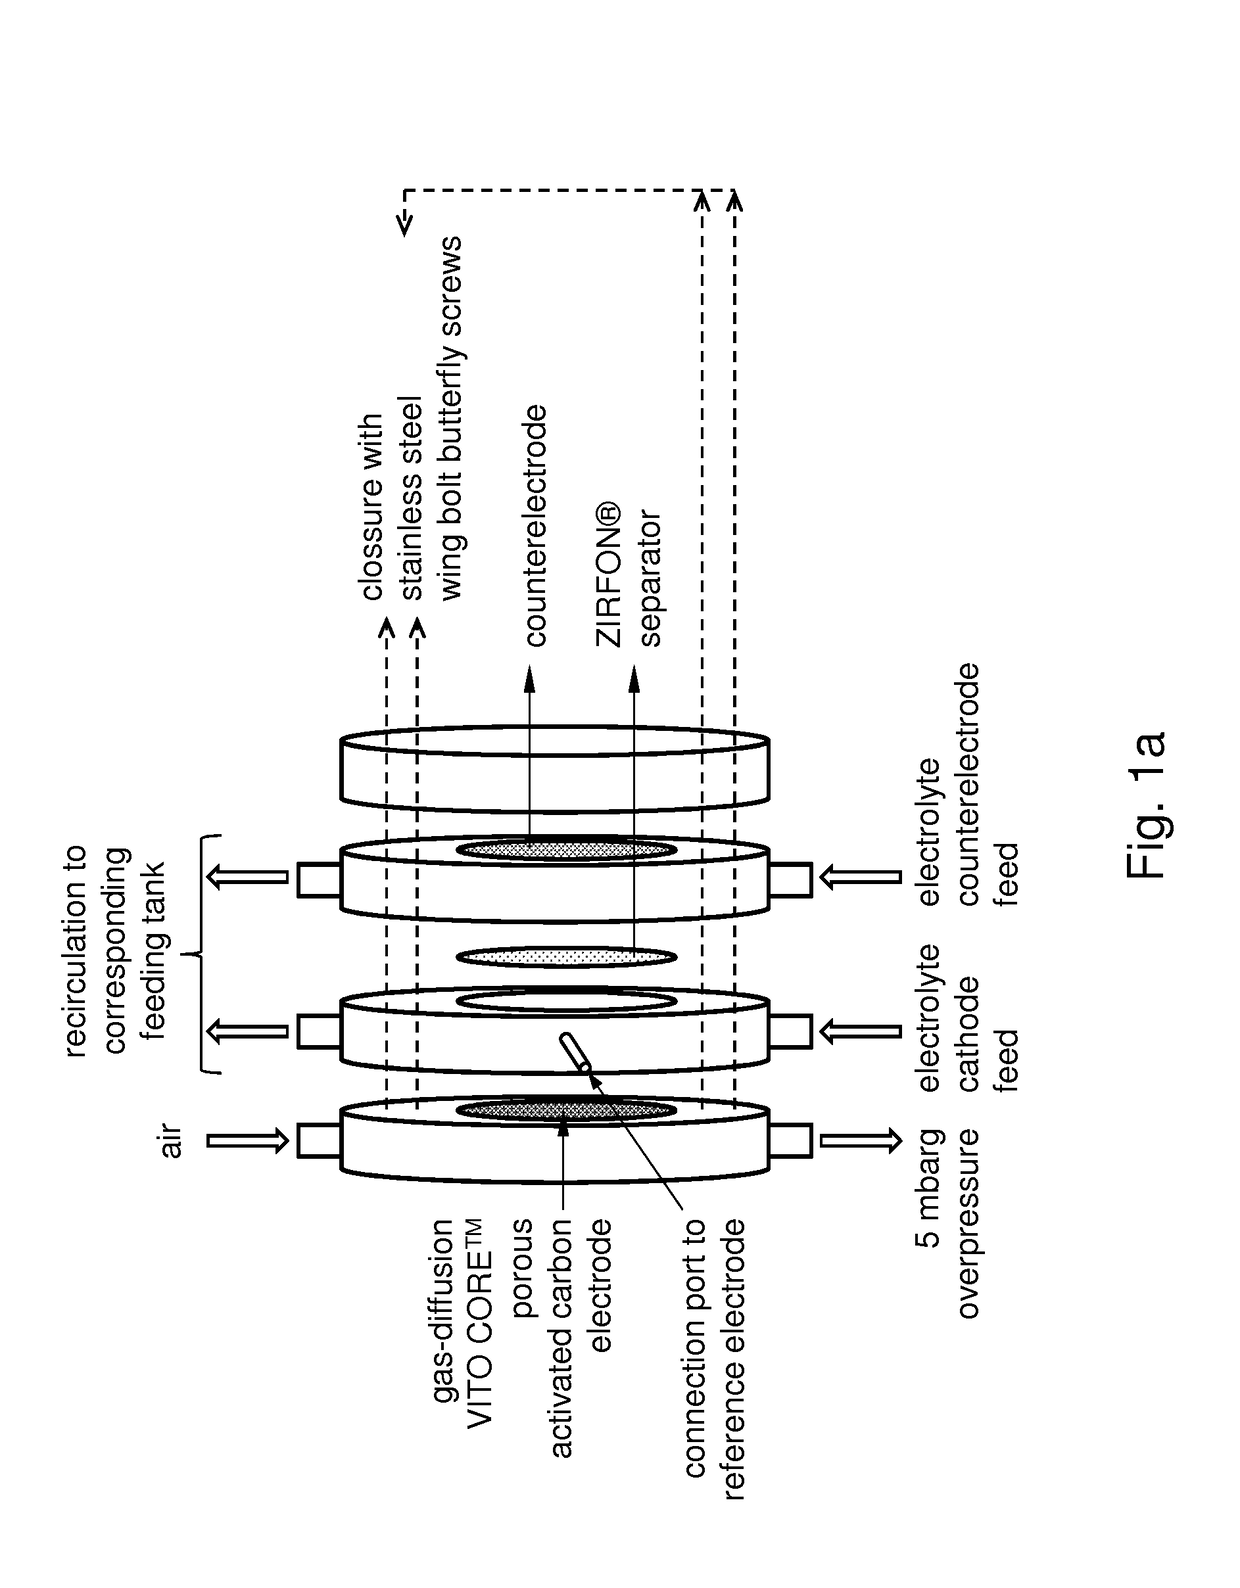 An electrochemical process for preparing a compound comprising a metal or metalloid and a peroxide, ionic or radical species